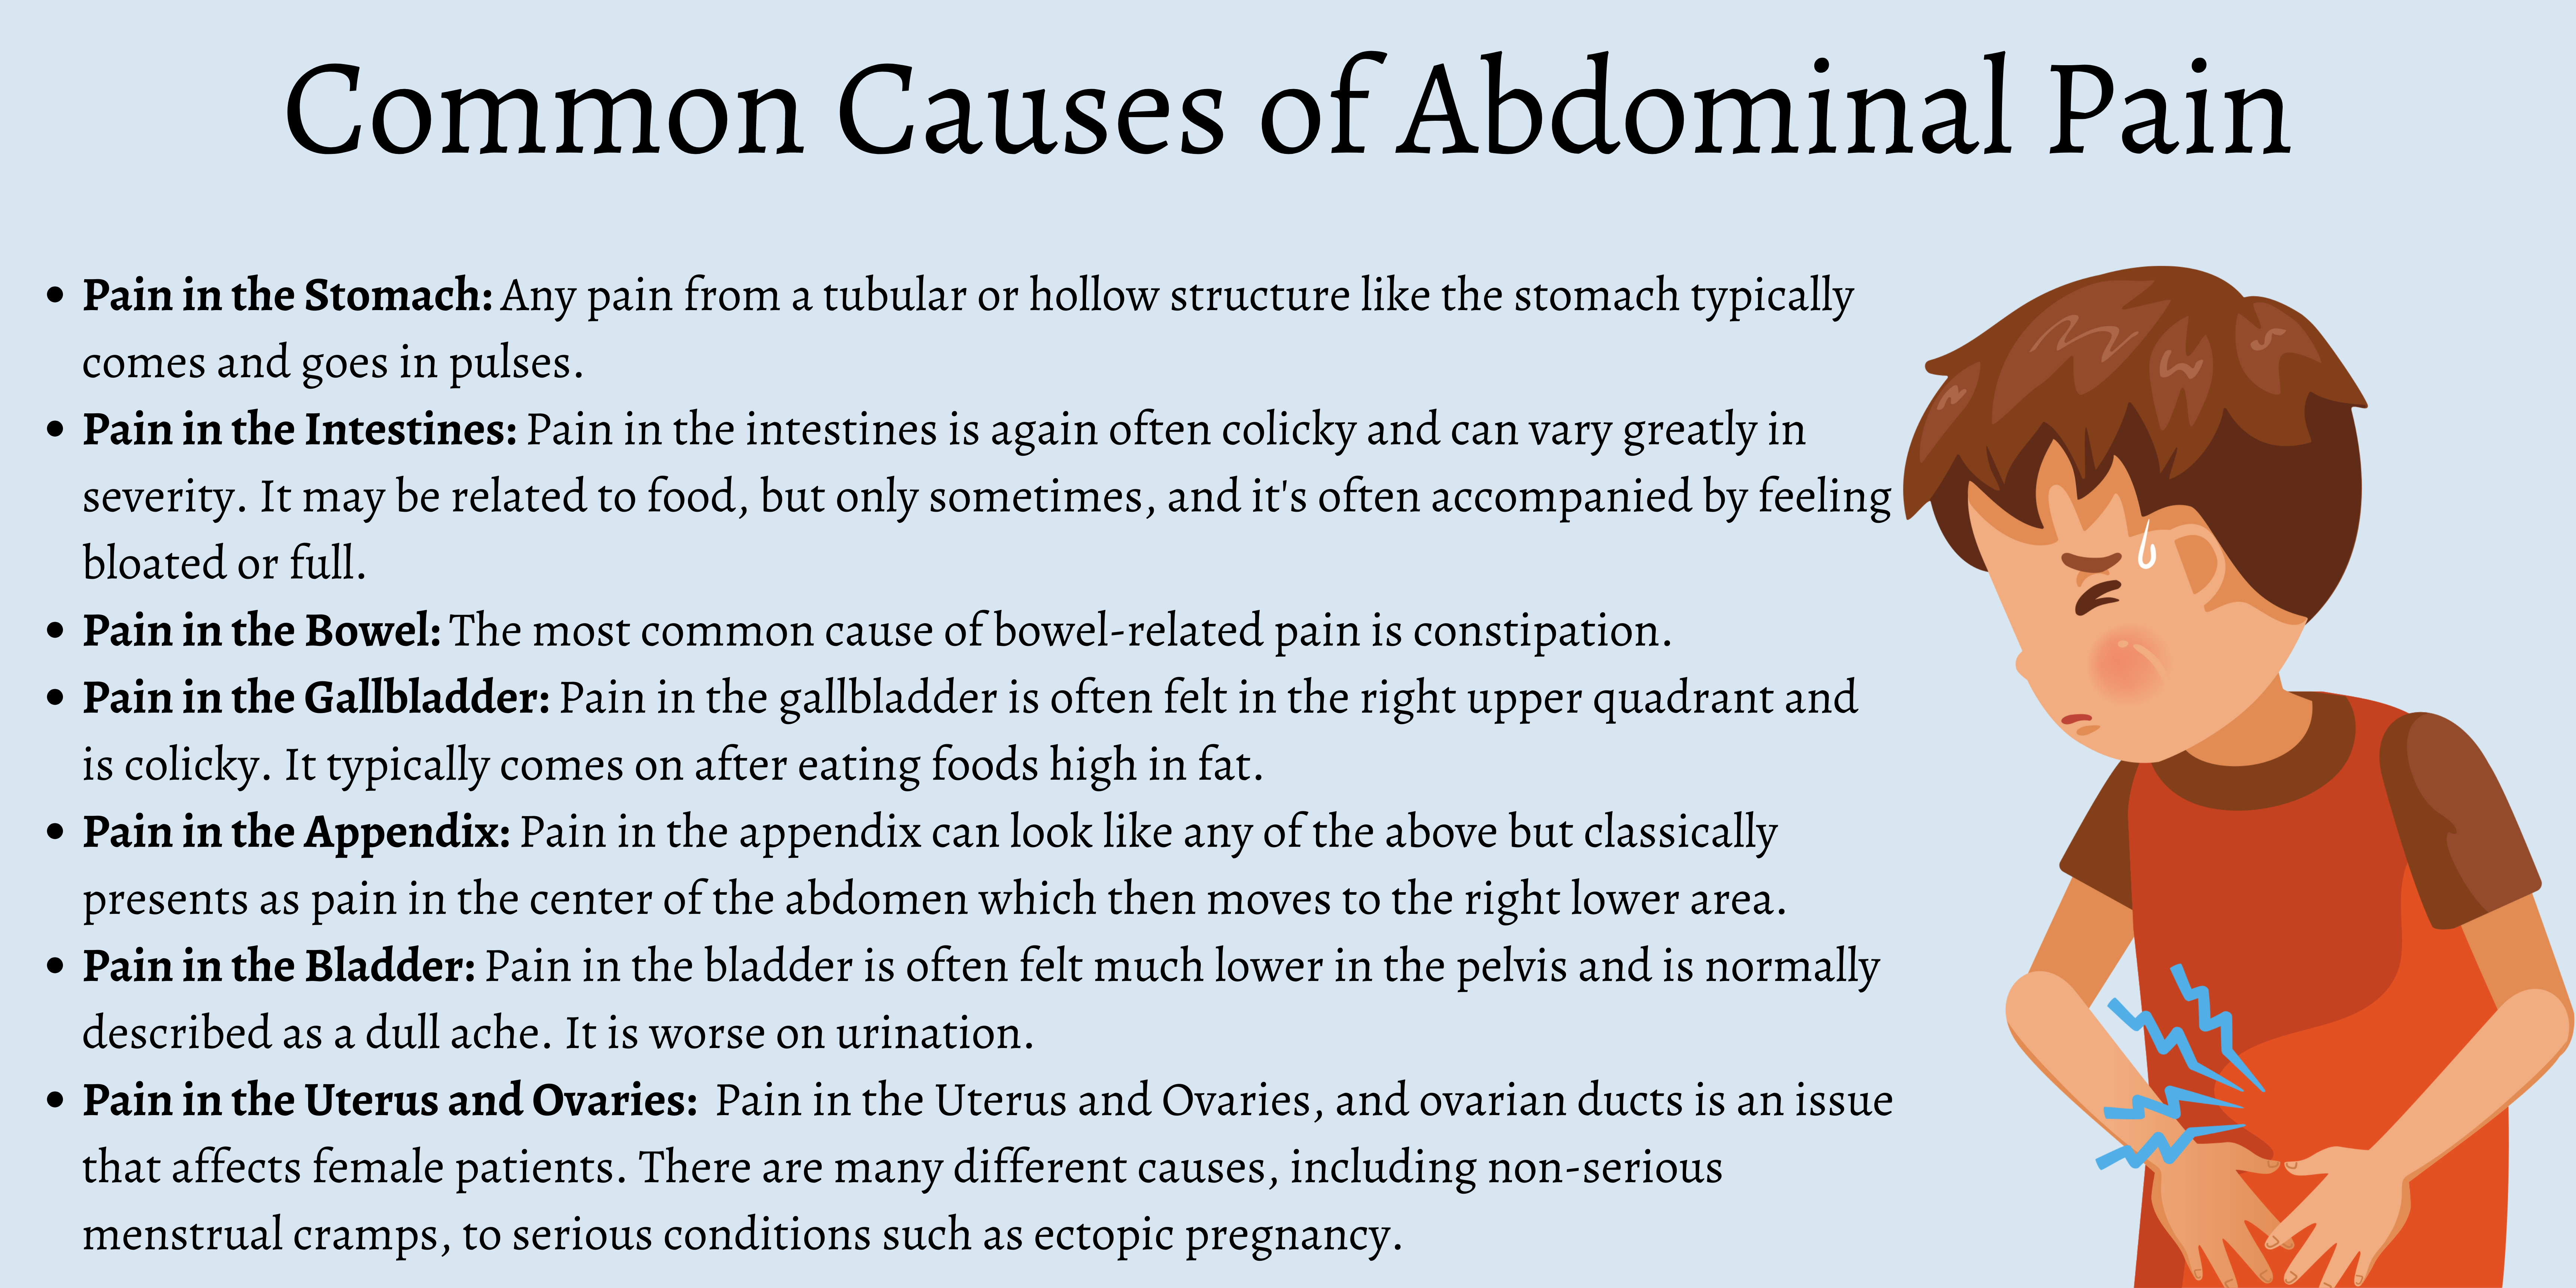 Lower Abdominal Pain: Common Causes and Treatment